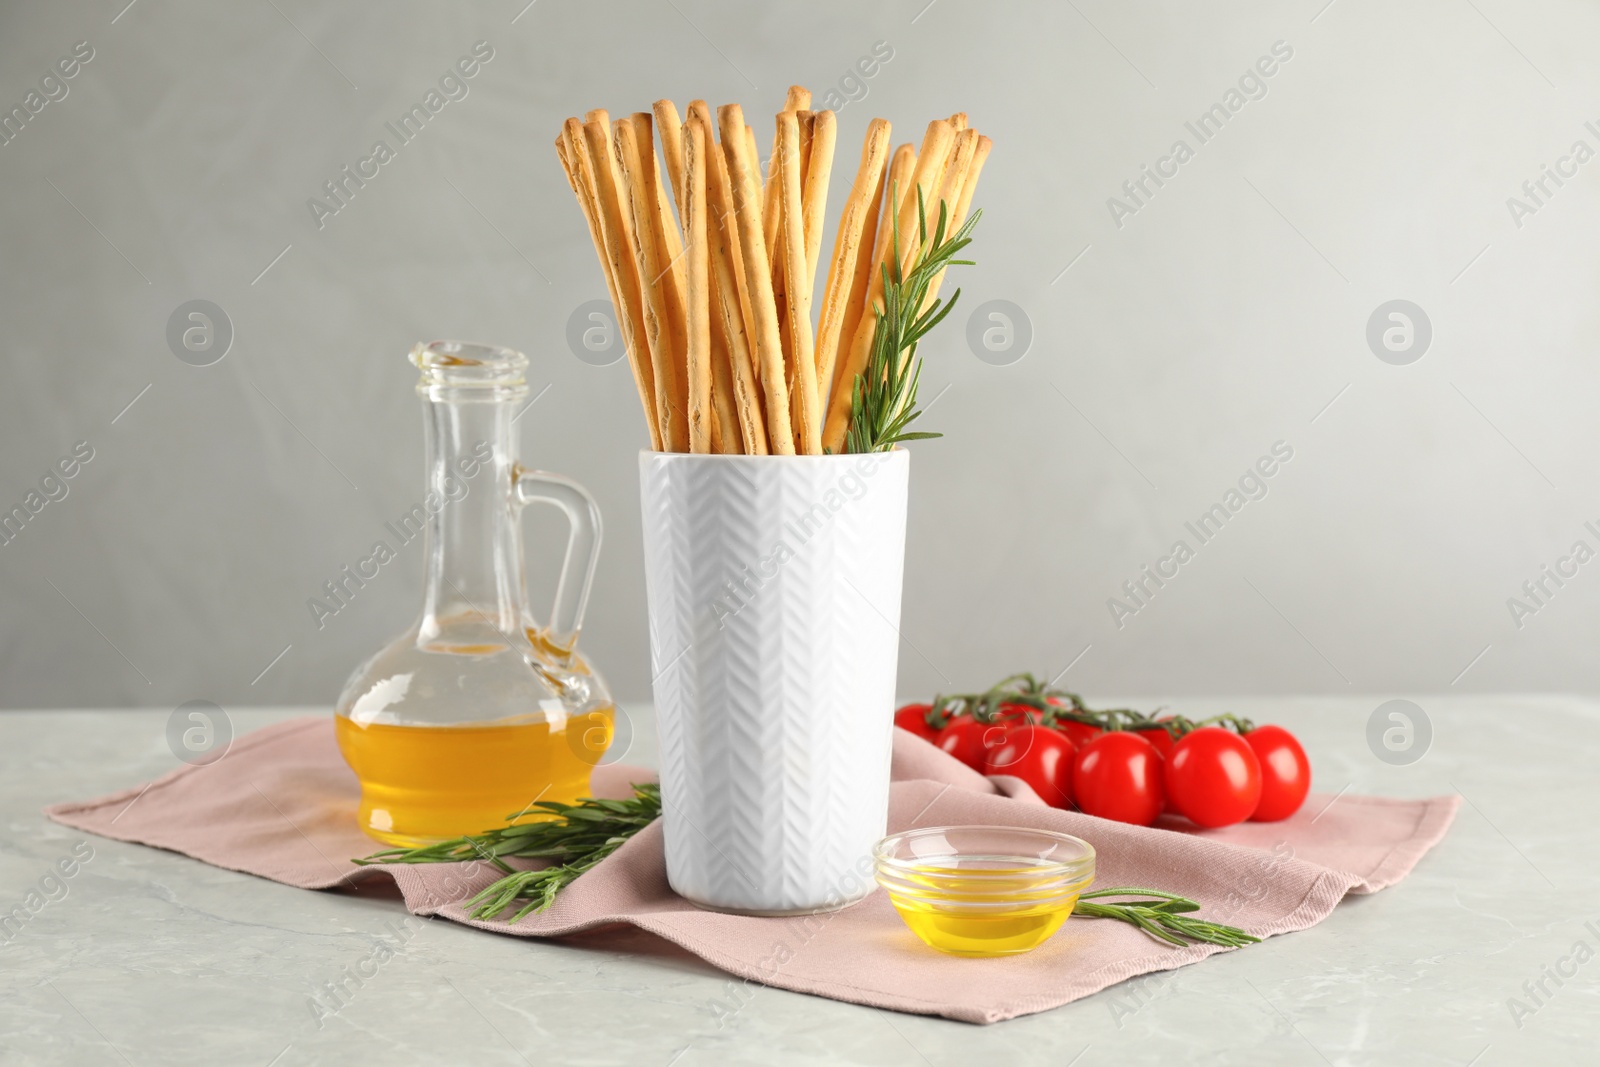 Photo of Delicious grissini sticks, oil, rosemary and tomatoes on grey marble table